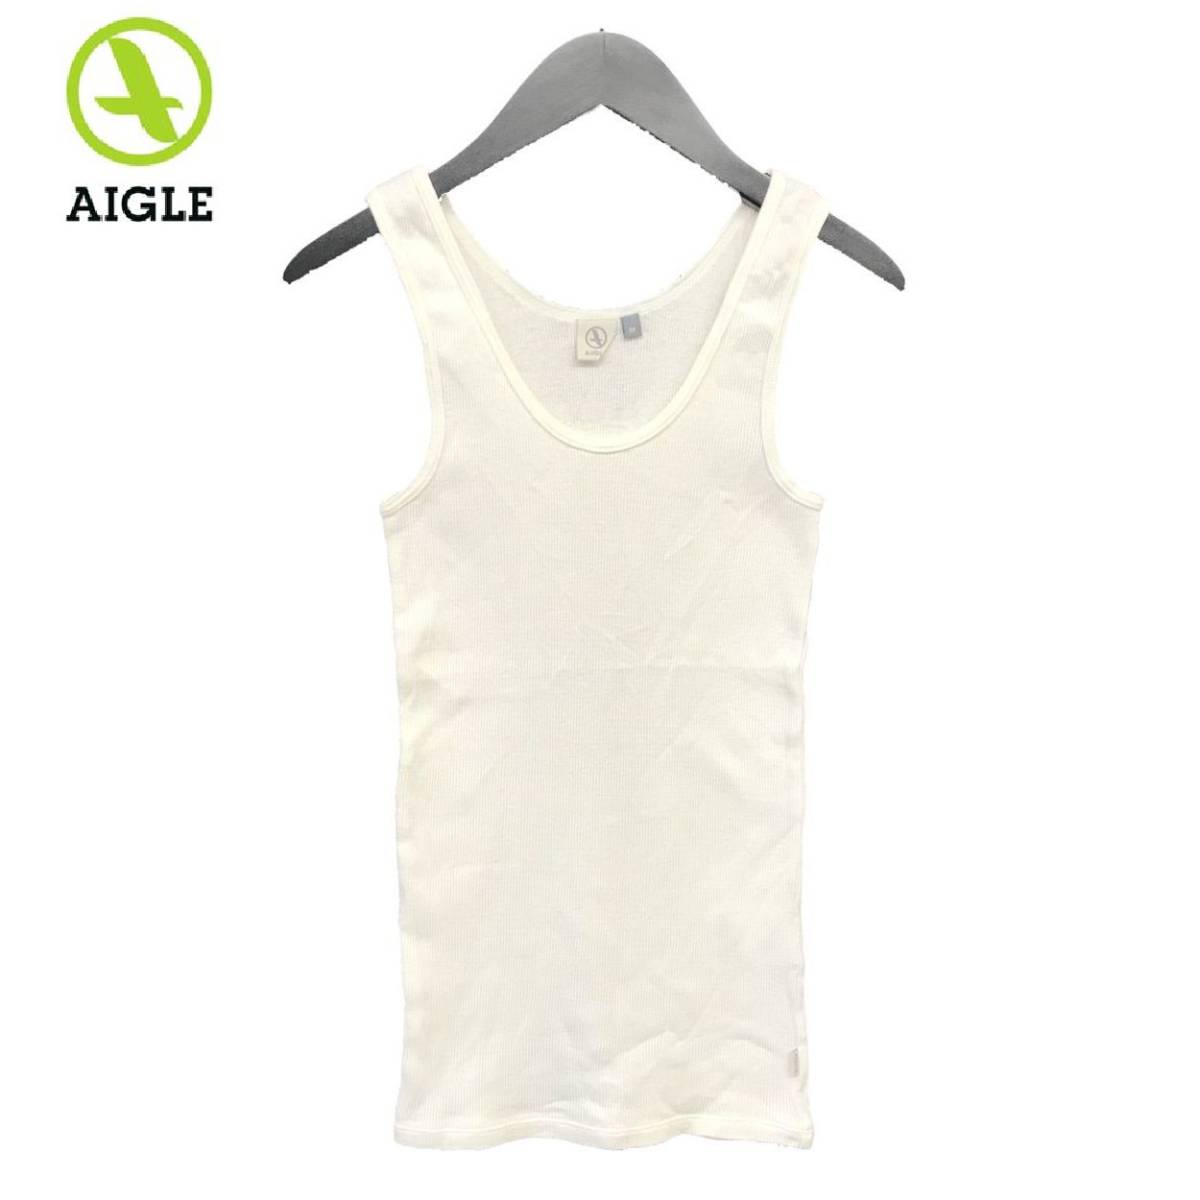  unused goods AIGLE Aigle plain stretch no sleeve cut and sewn tanker tank top innerwear lady's outdoor M